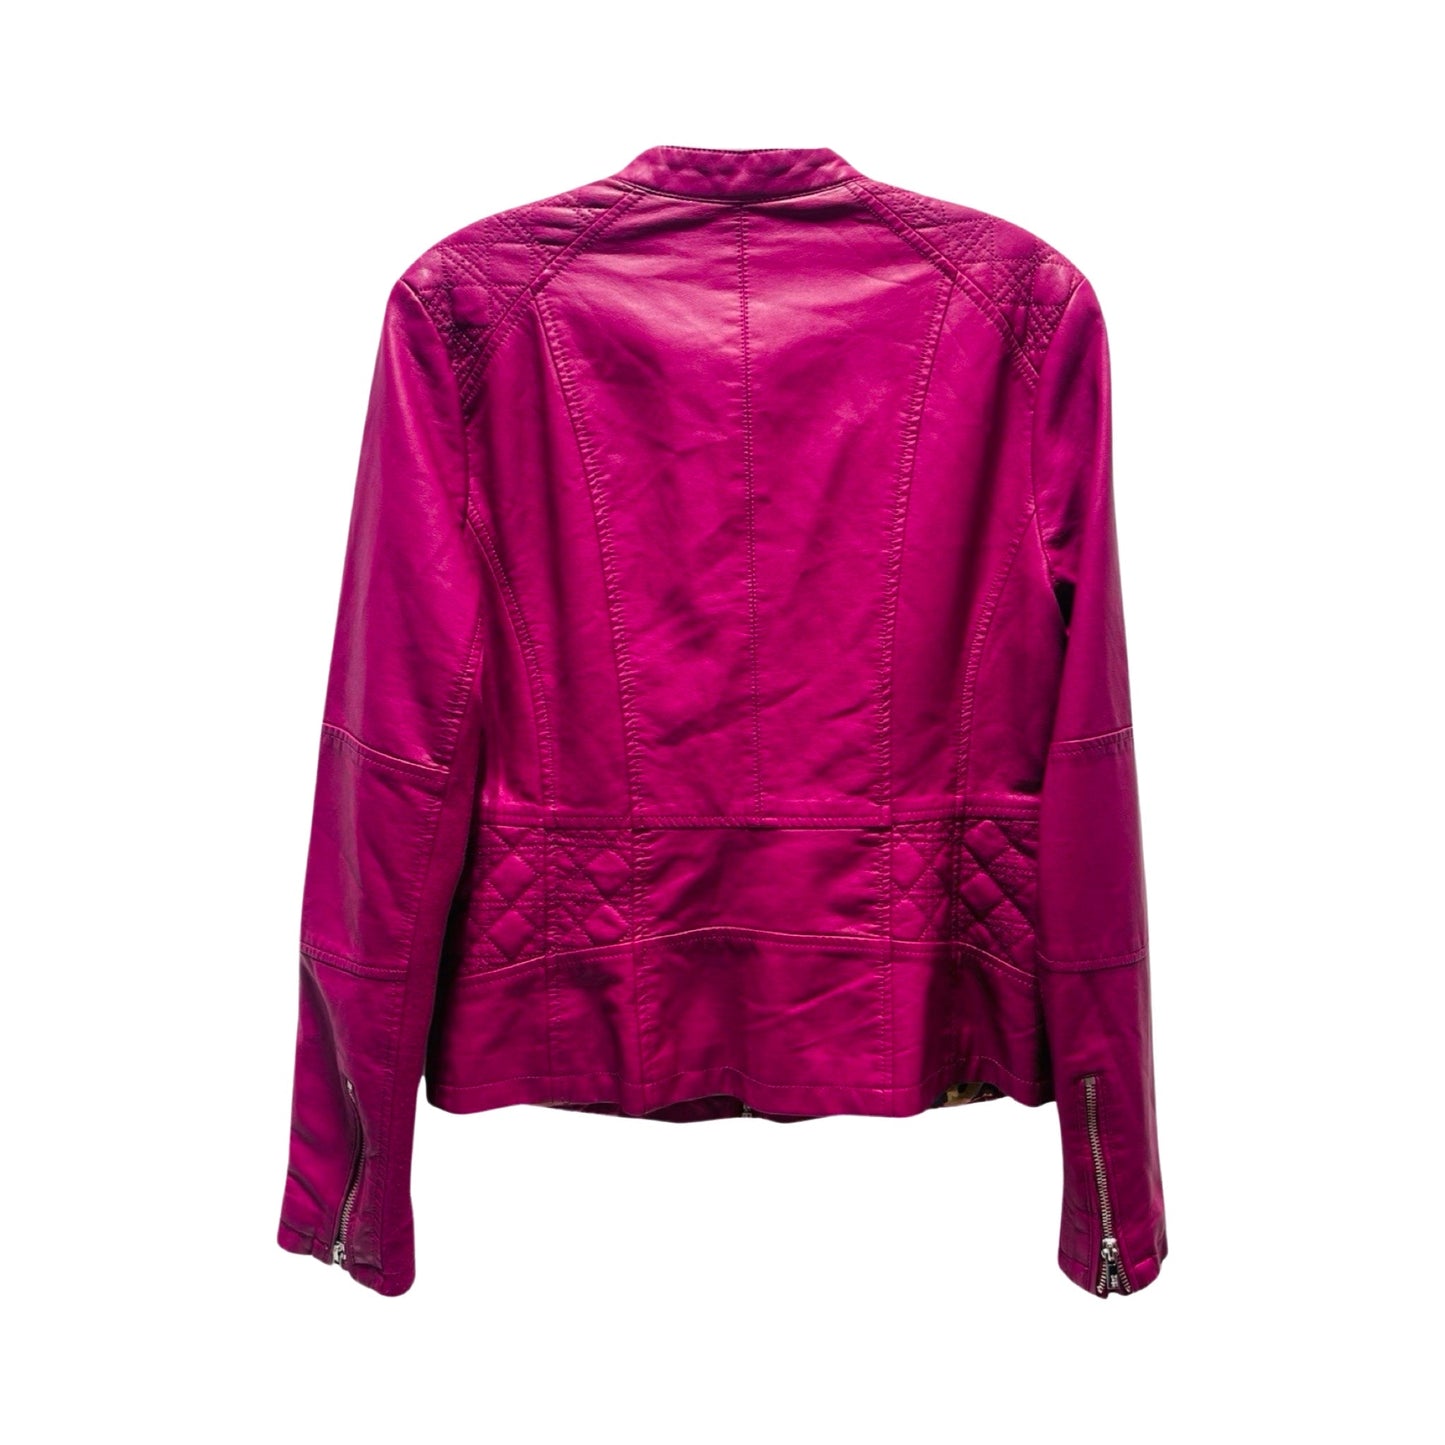 Full Zip Pink Jacket Leather By Black Rivet  Size: M